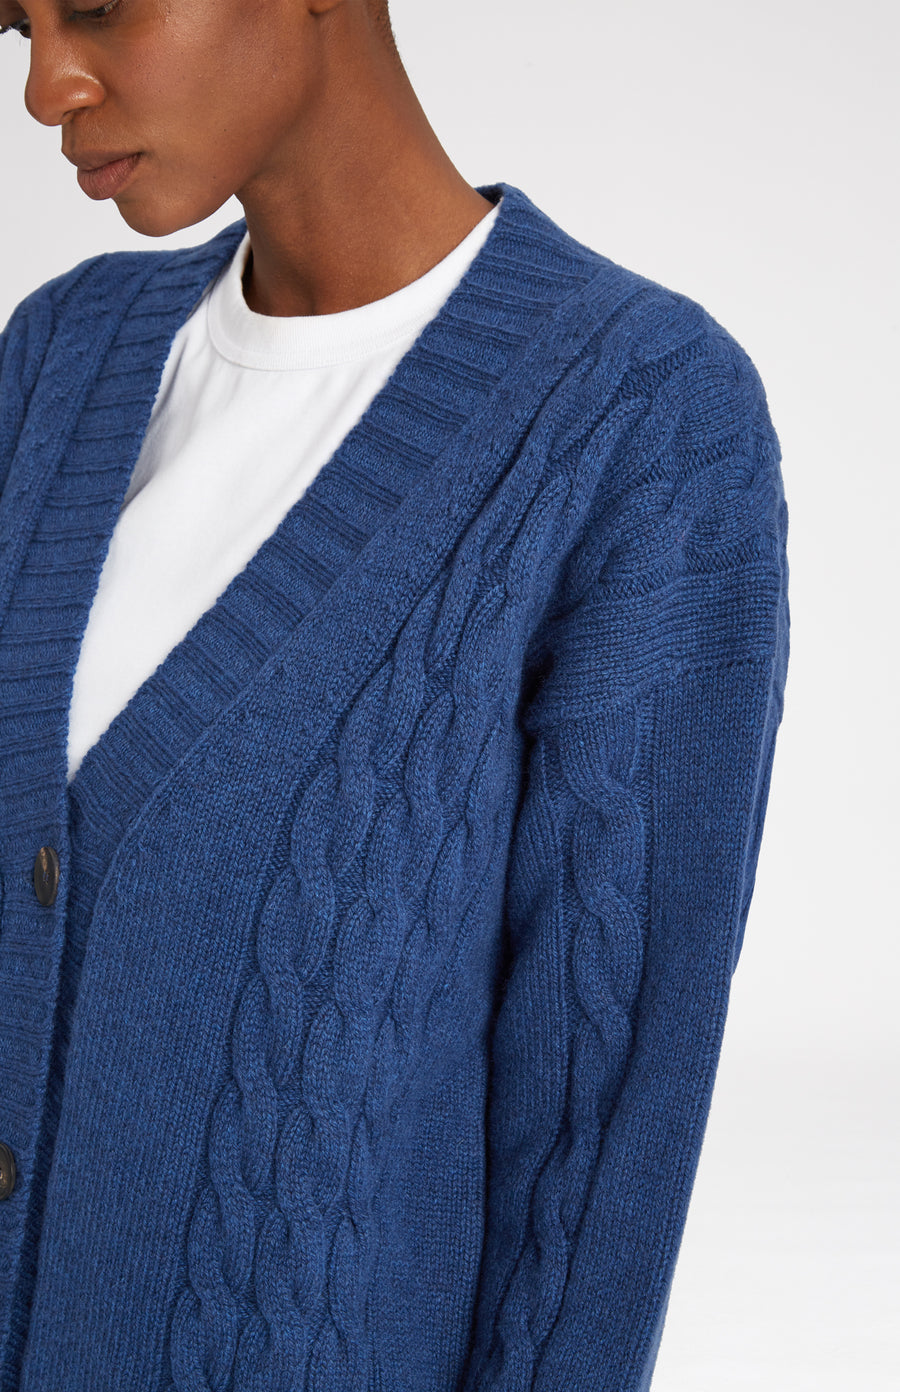 Superfine Wool Cardigan with Cable detail in Storm Blue neck detail - Pringle of Scotland